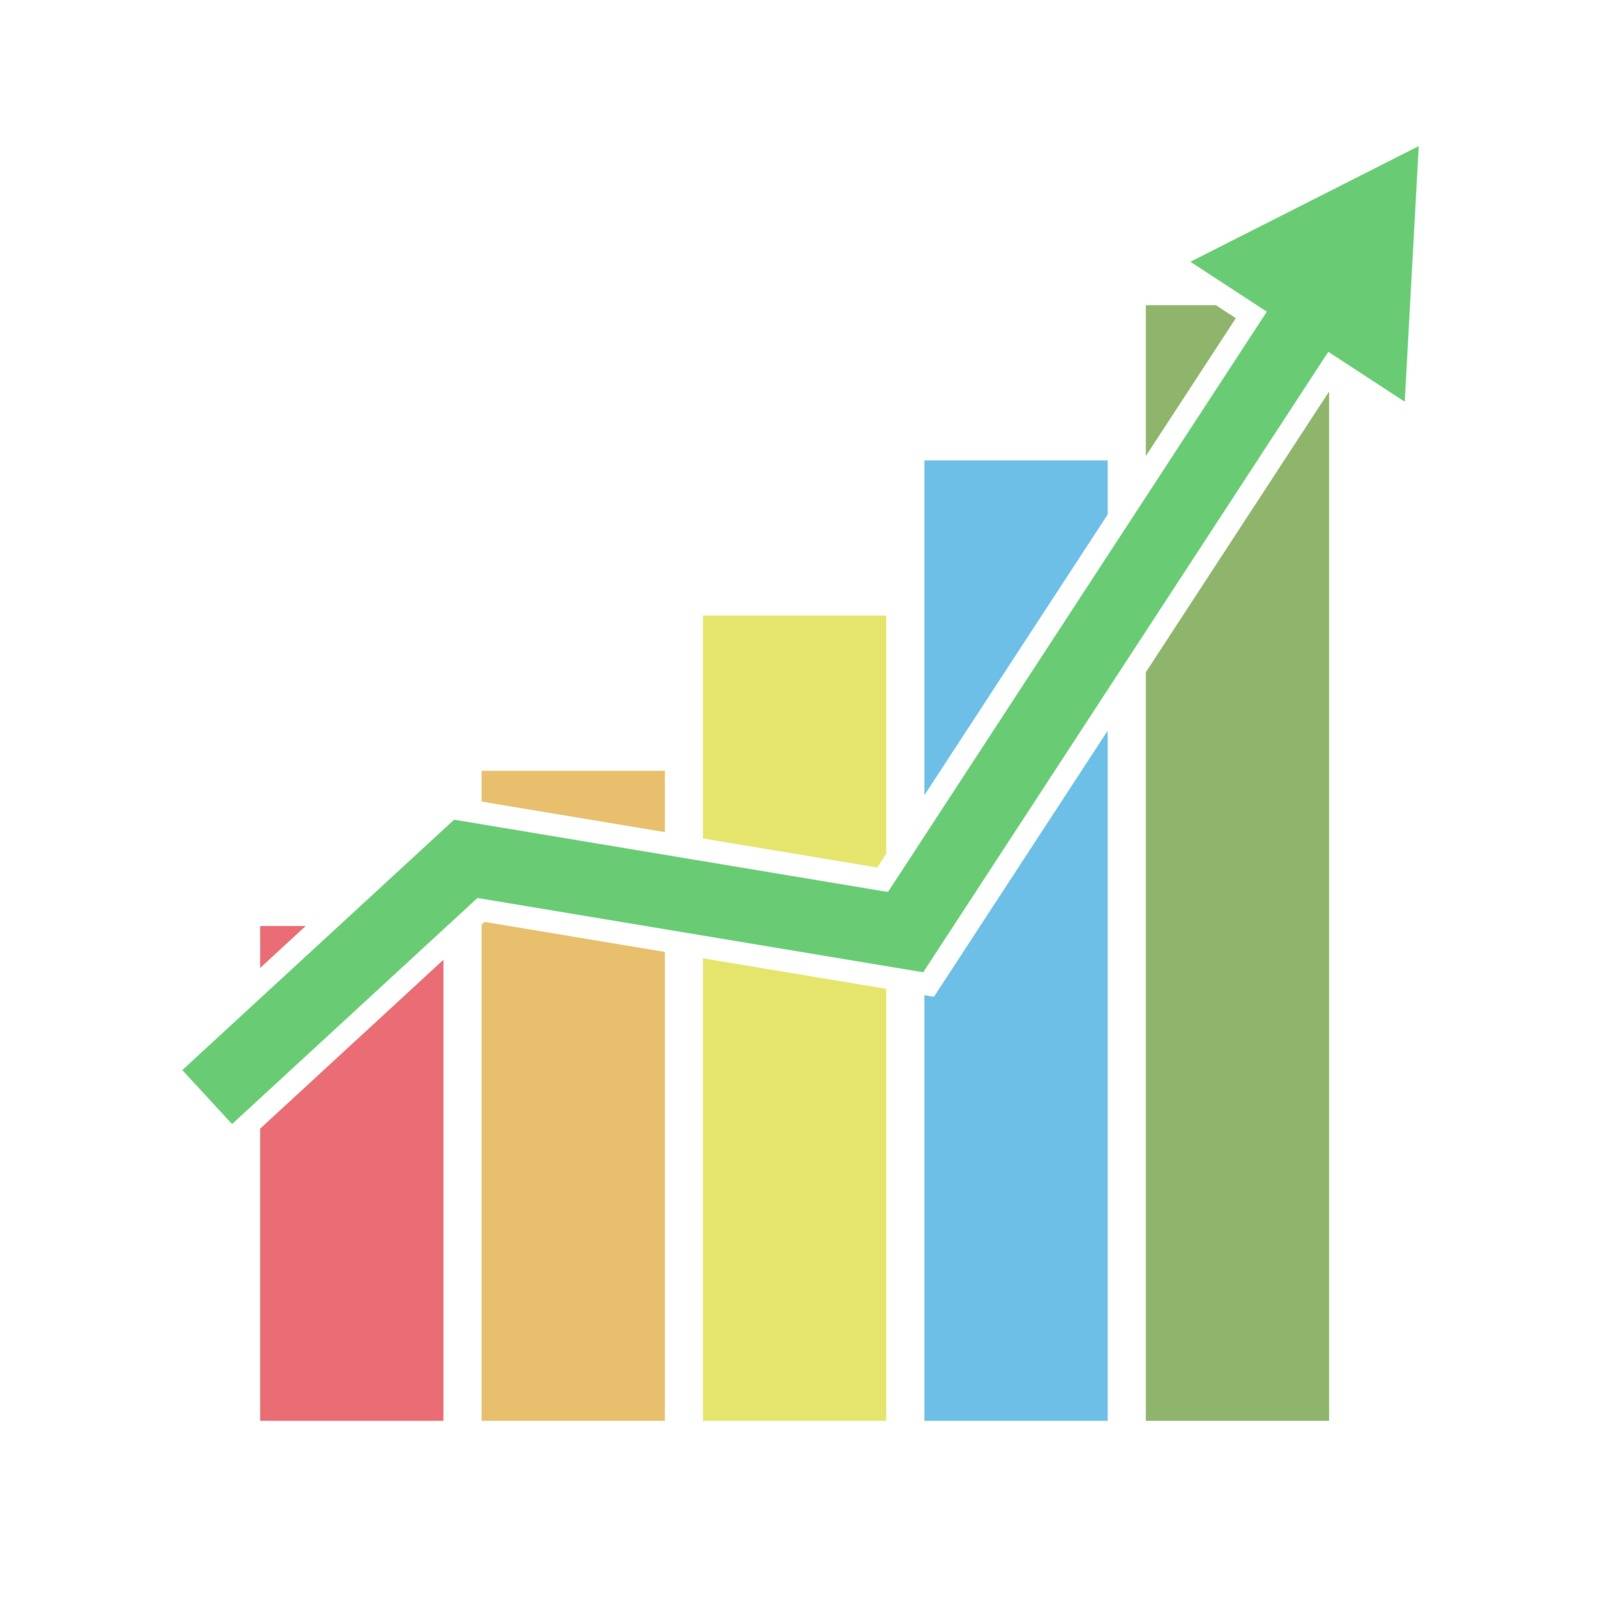 Vector icon of business growth chart, Finance, Stock illustratio by Grommik